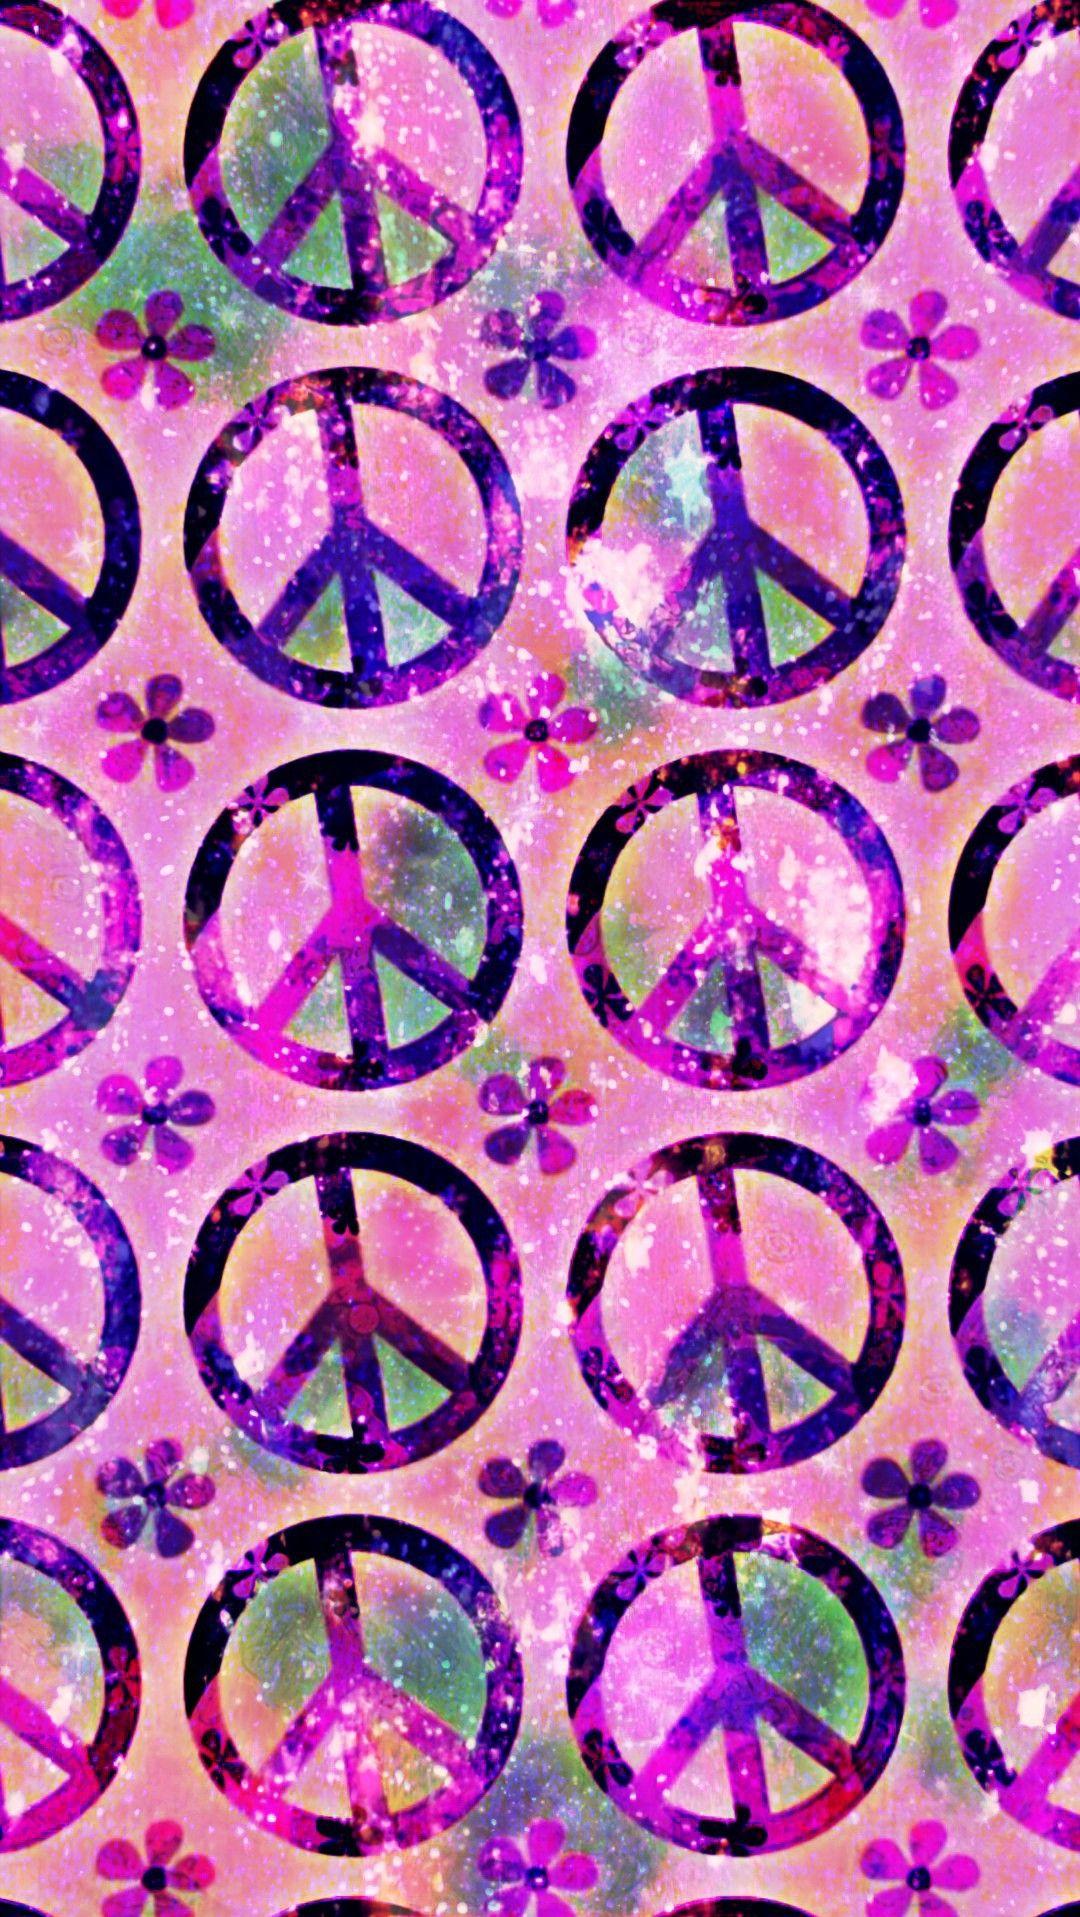 Boho Peace Galaxy, made by me #purple #sparkly #wallpaper